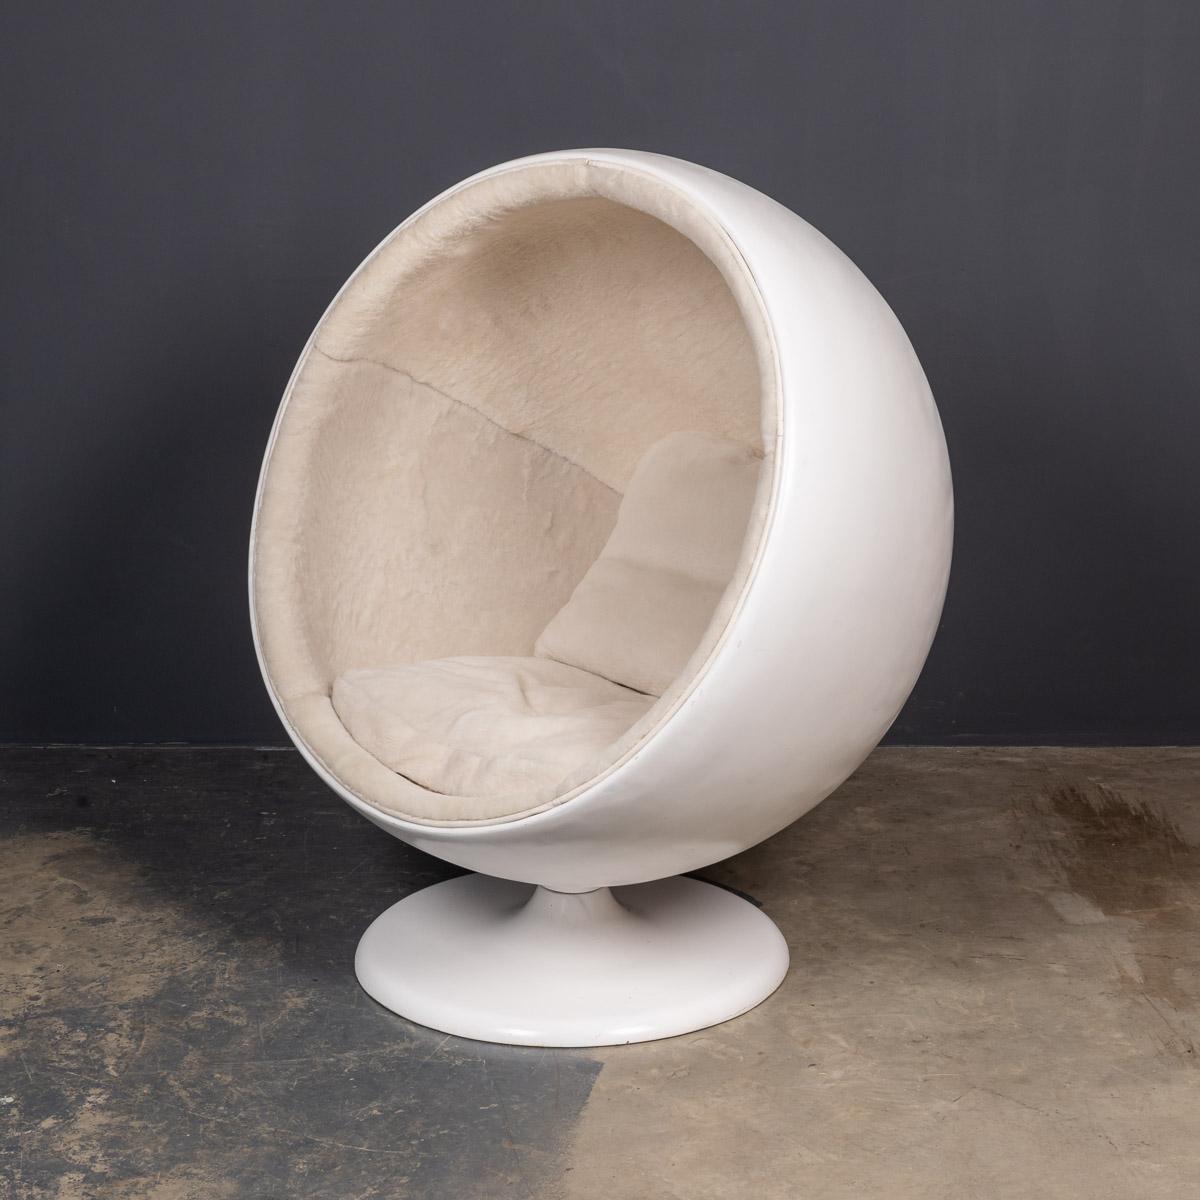 The iconic and original ball chair, designed by Eero Aarnio for Asko. The interior cushioning has been refurbished with lamb sheepskin. The Ball Chair was designed by Finnish furniture designer Eero Aarnio in 1963. The Ball Chair is also known as